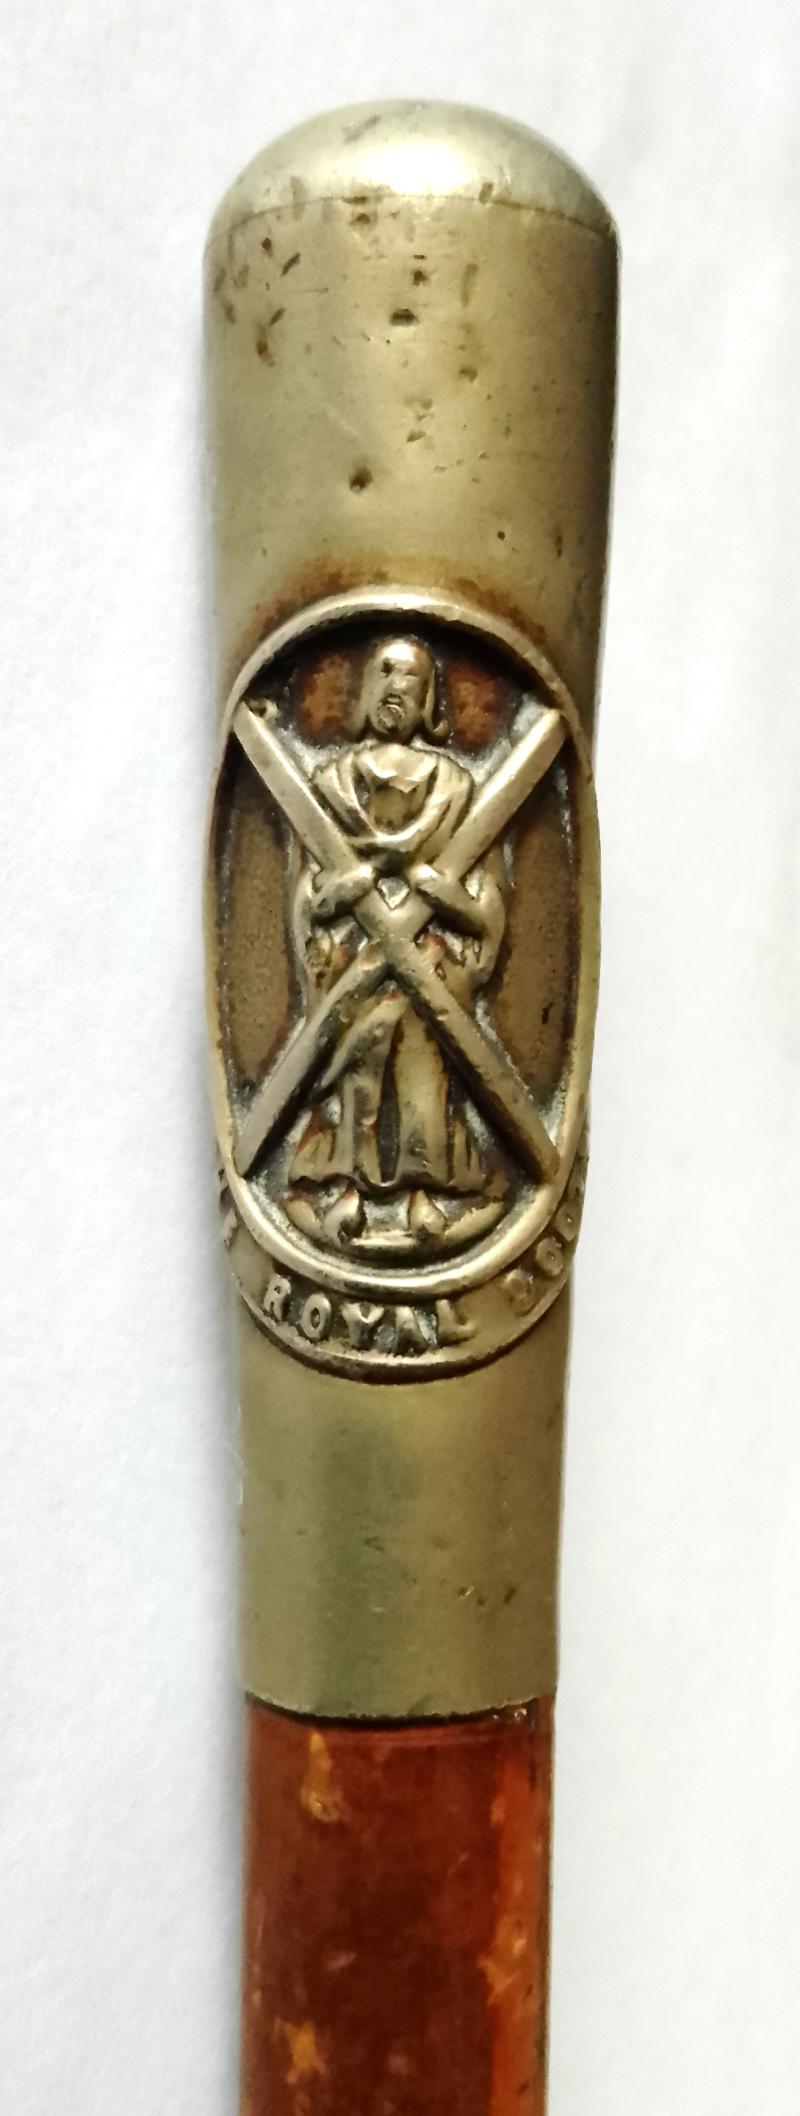 Royal Scots Swagger Stick